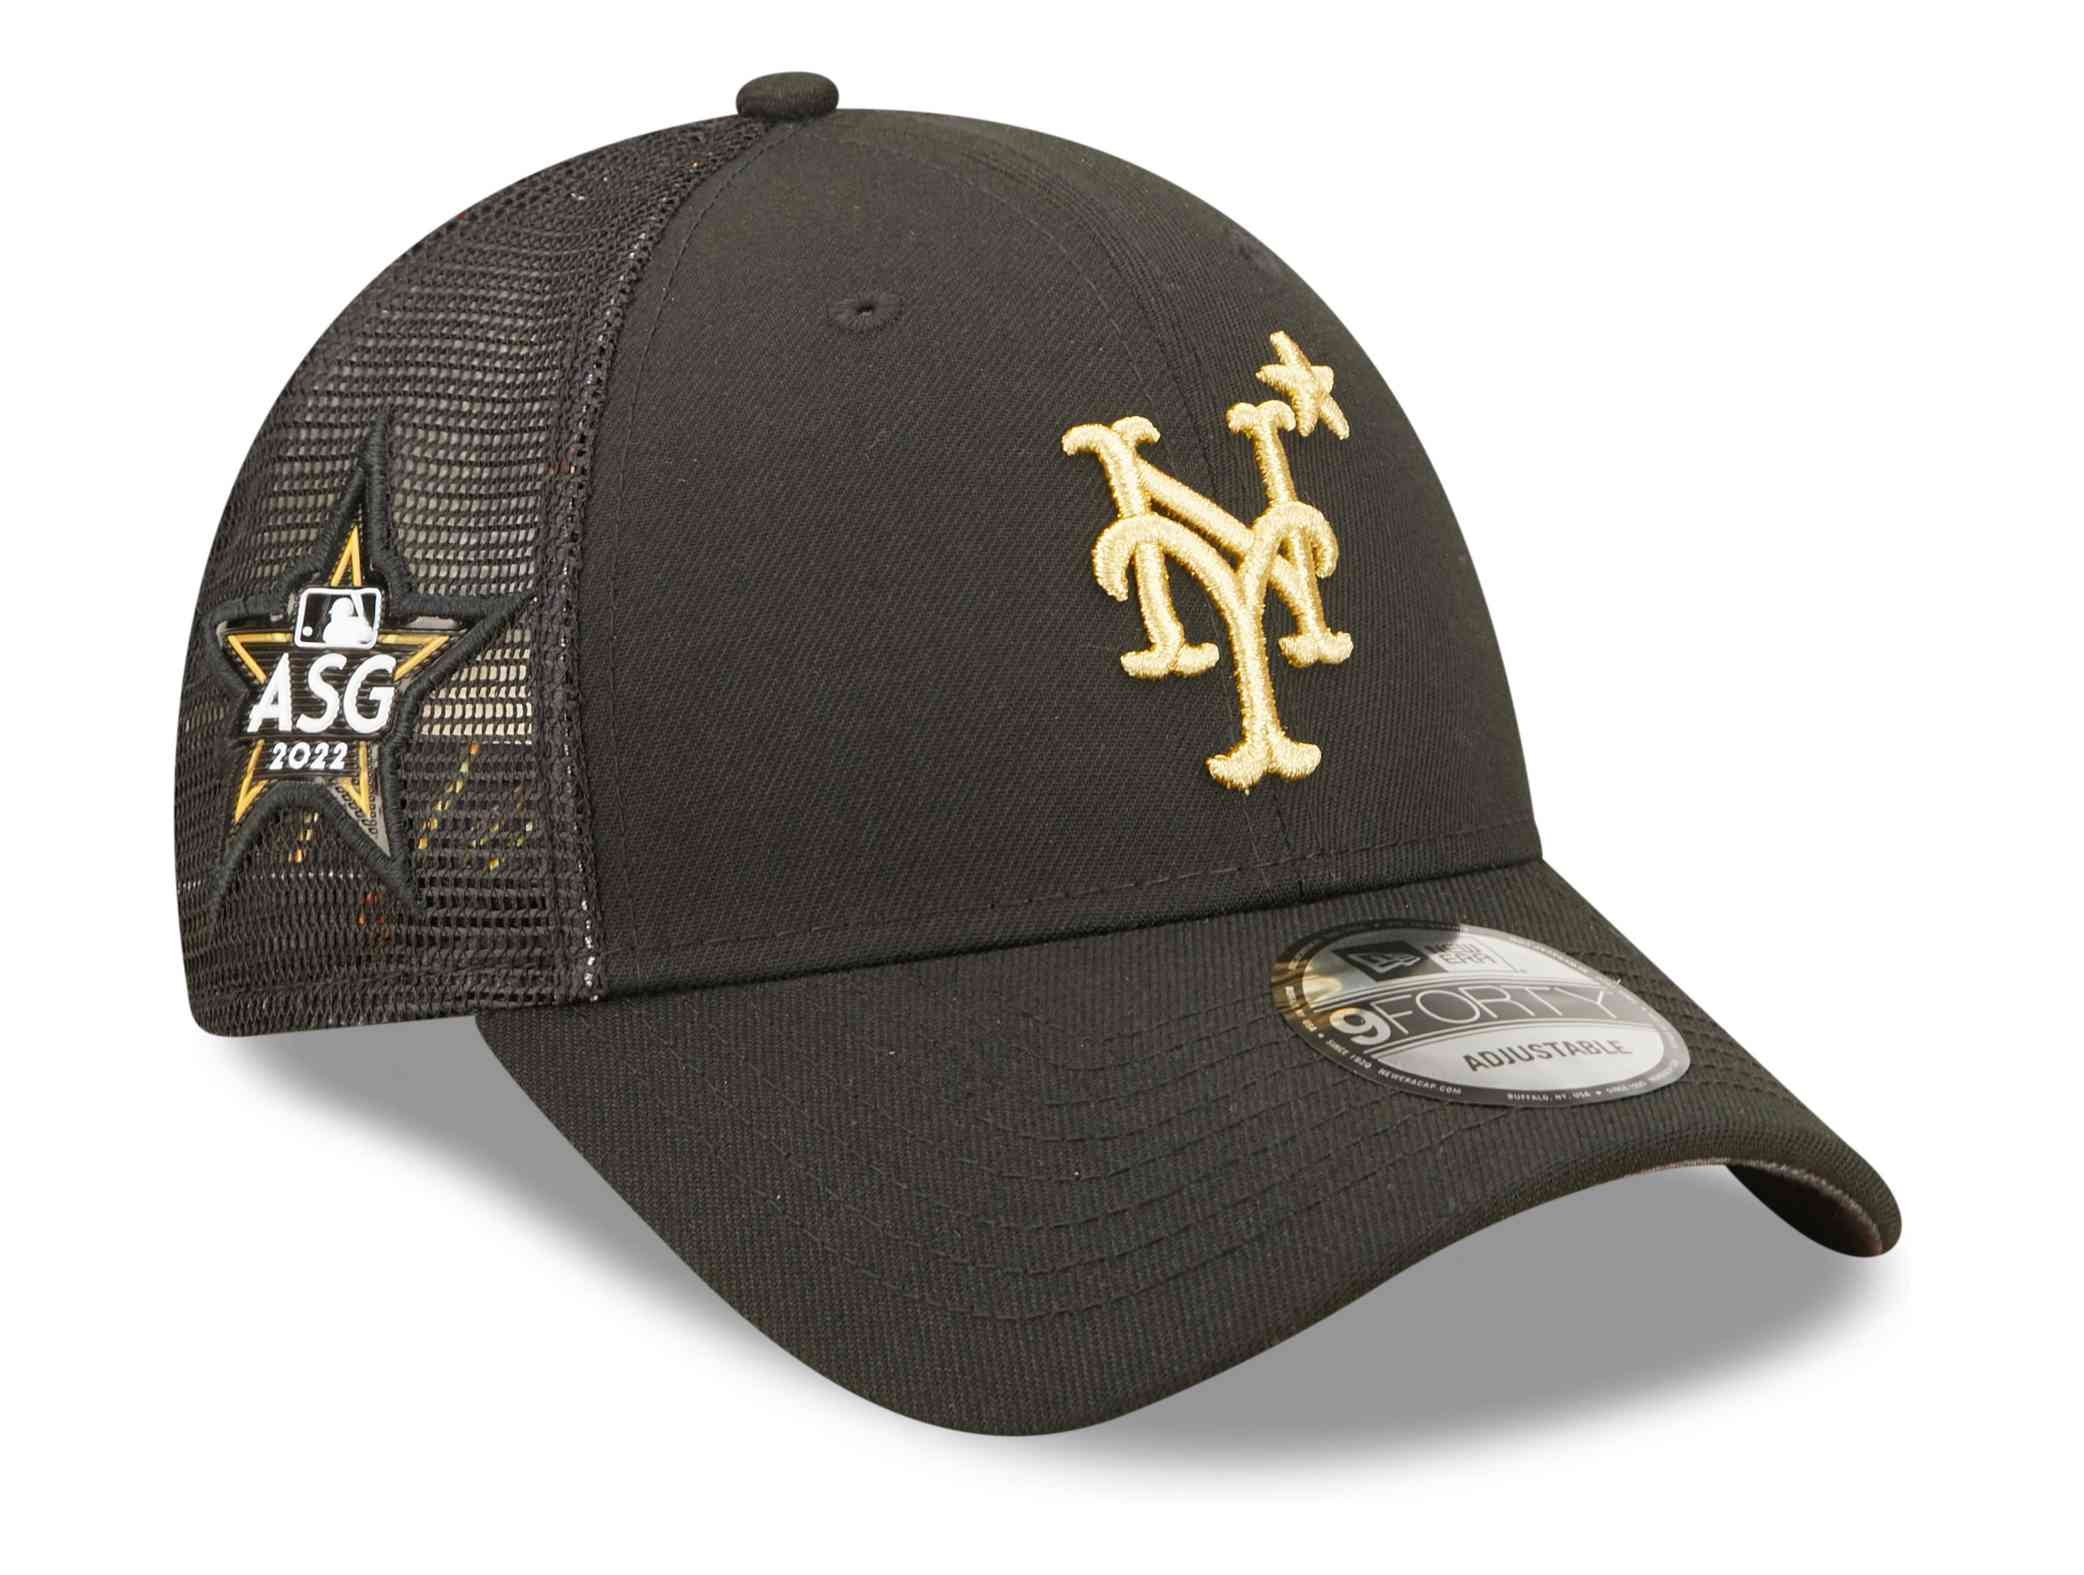 New Era - MLB New York Mets All Star Game Patch 9Forty Snapback Cap